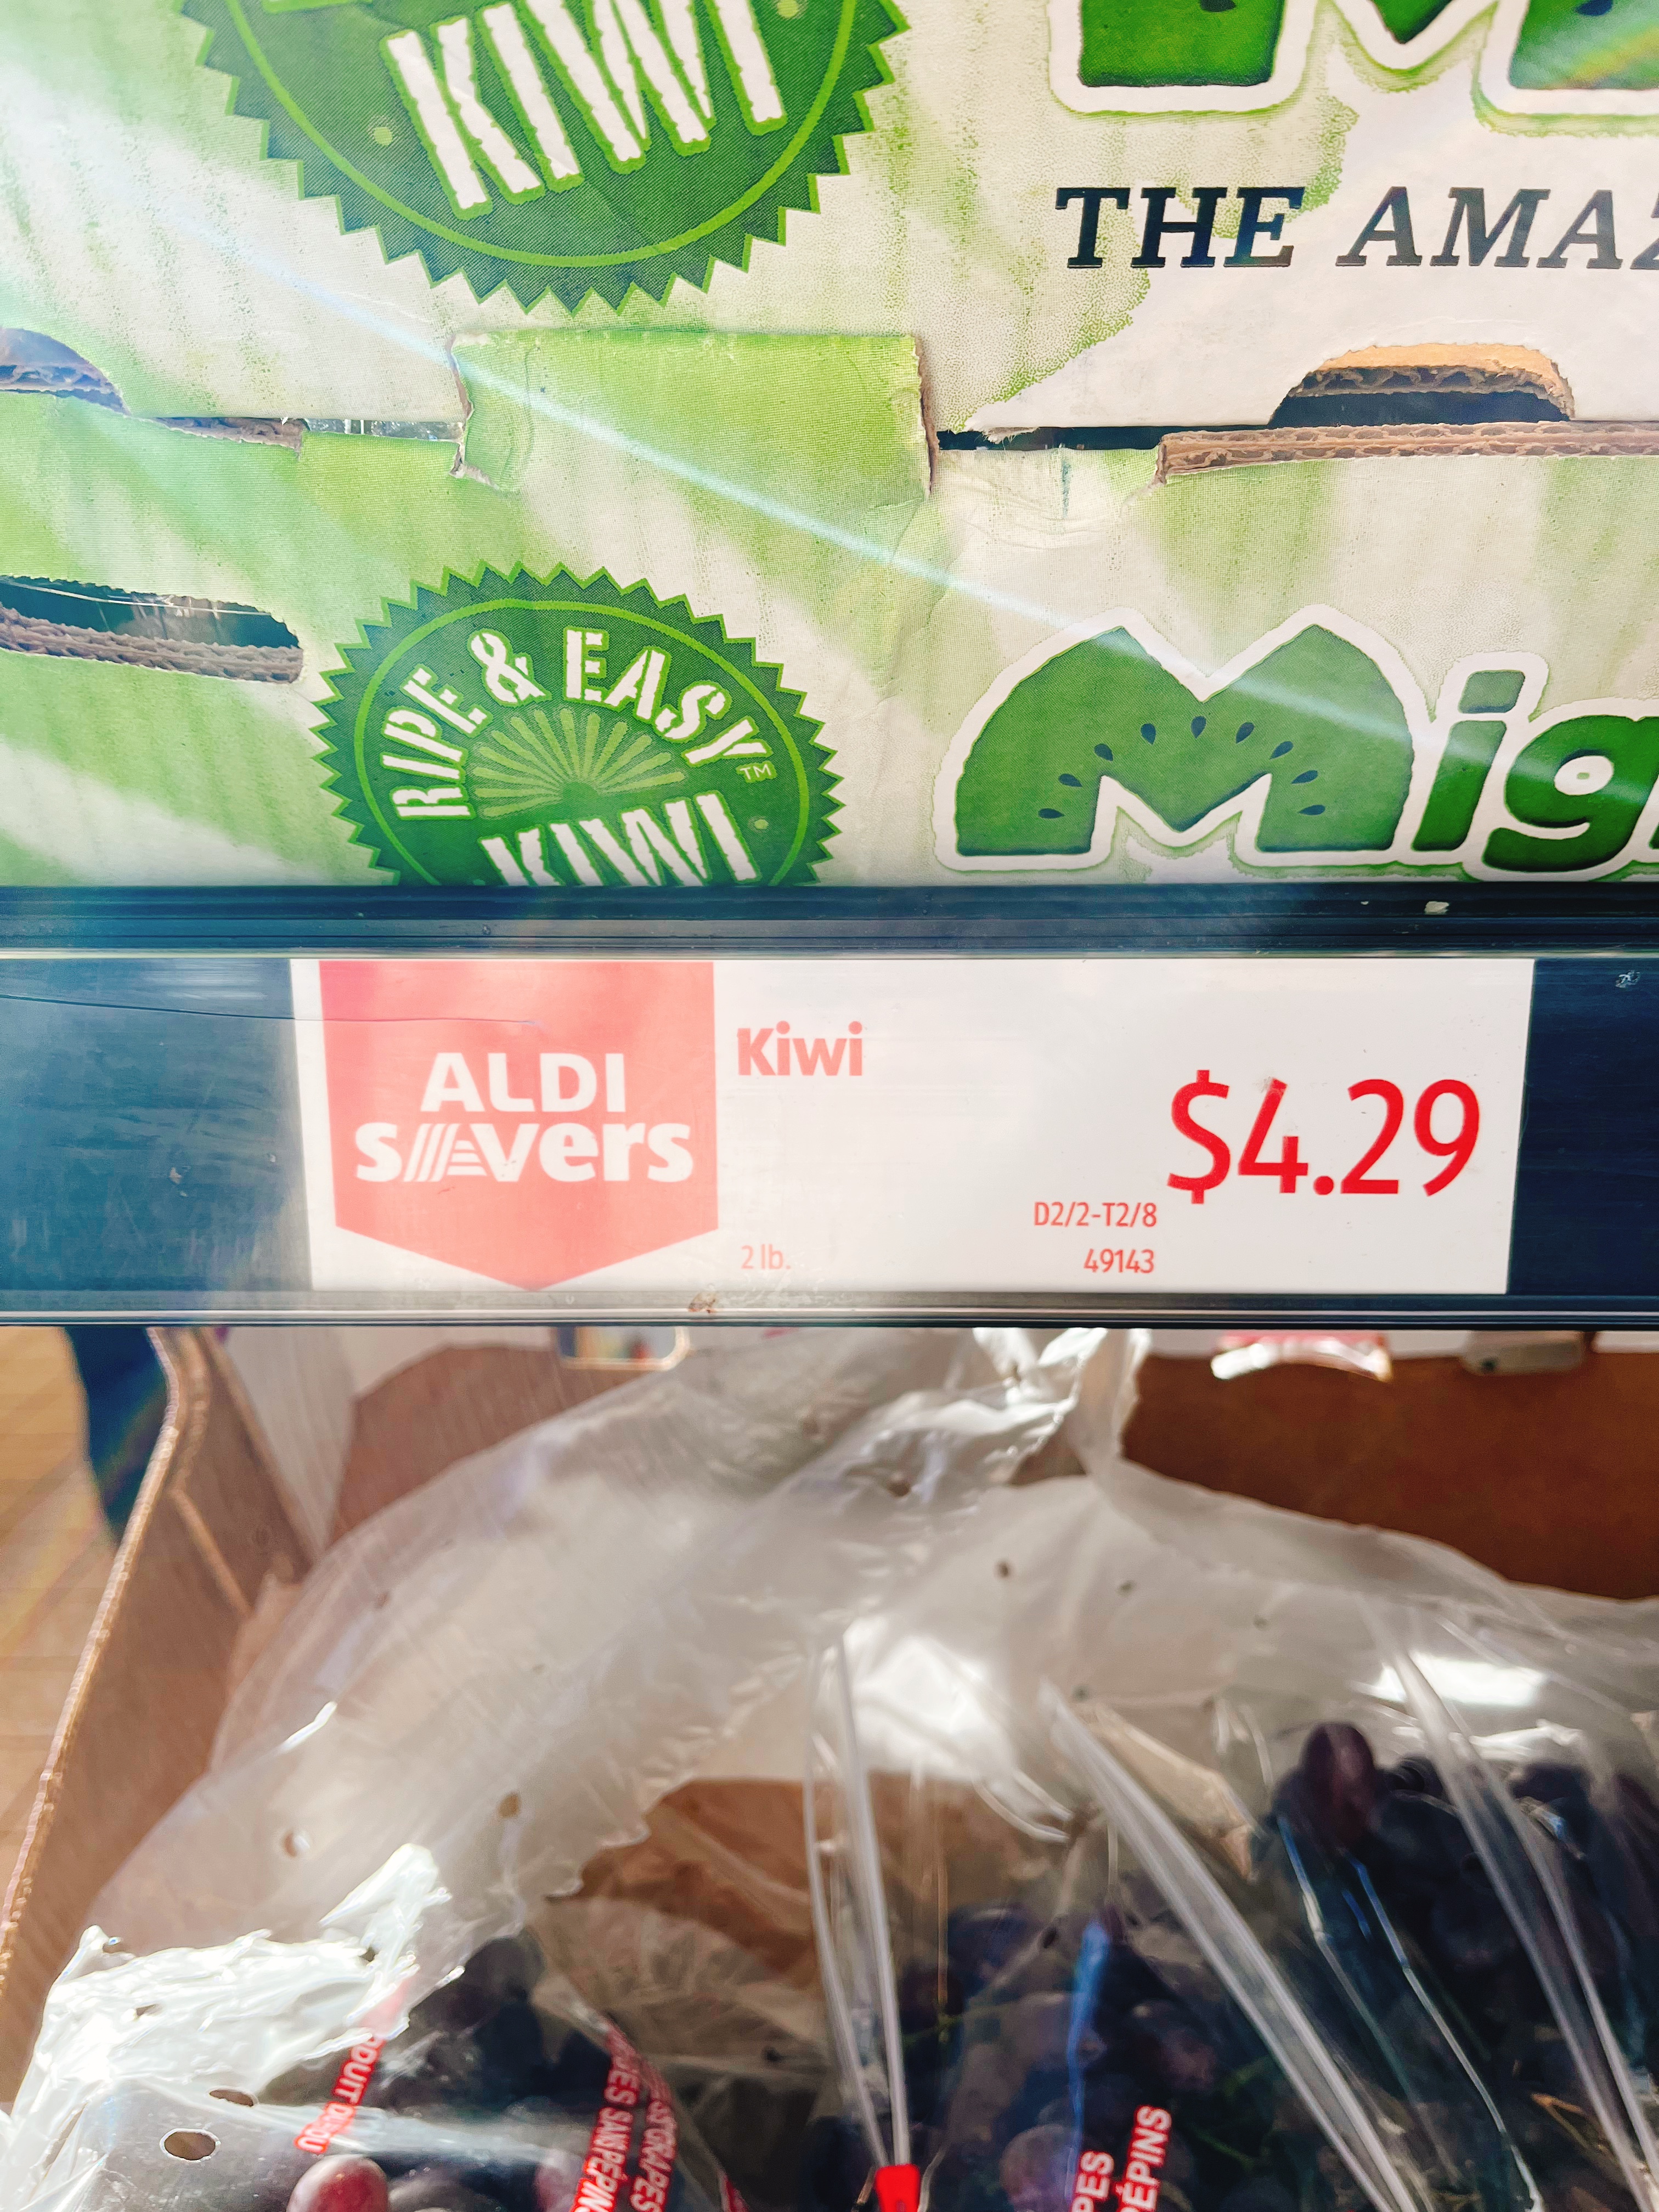 ALDI Savers tags are what's considered "on sale"